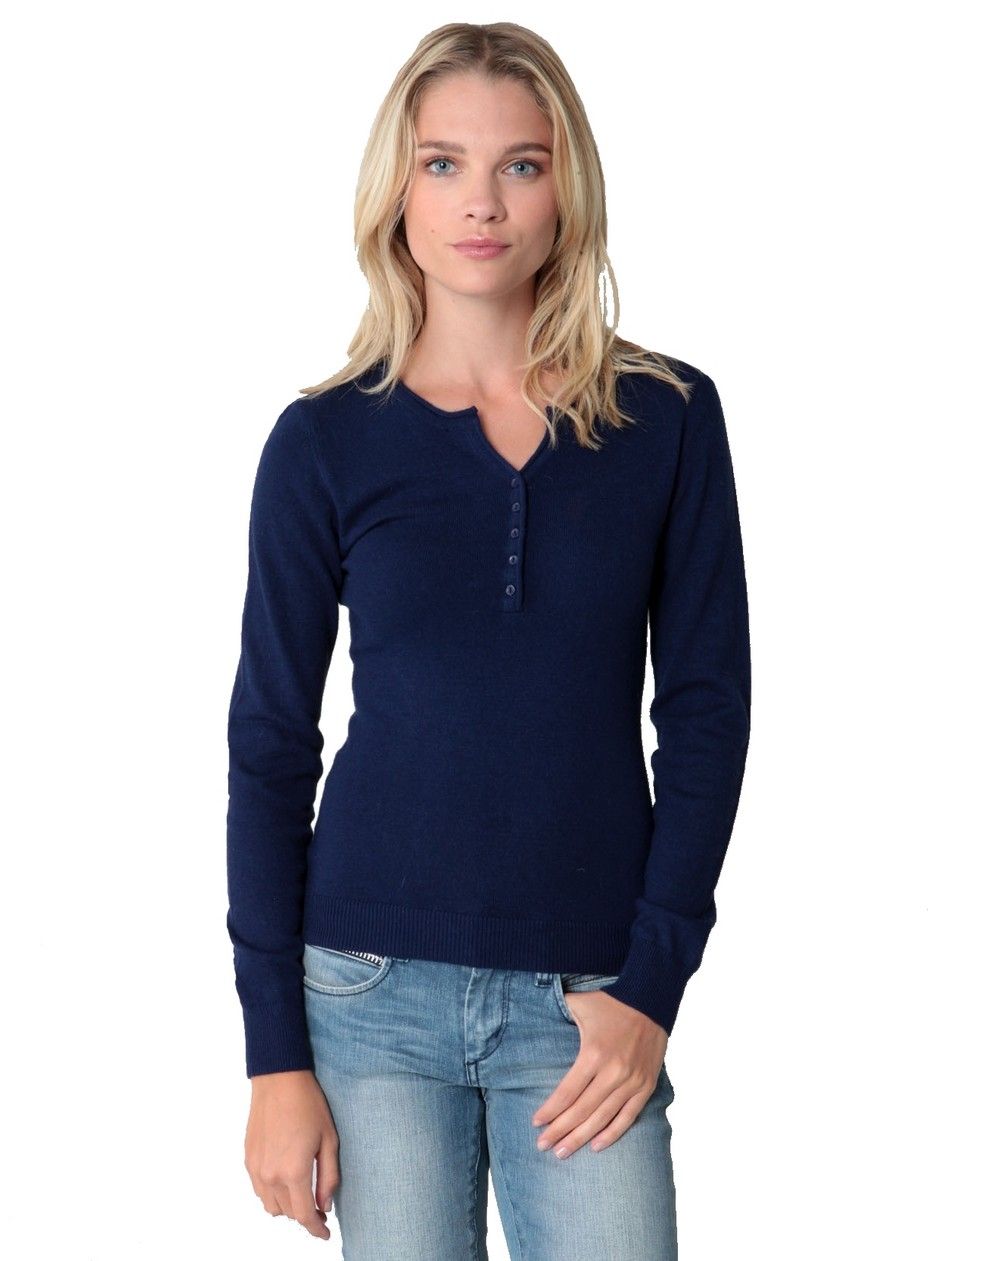 Assuili Tunisian Neck Sweater with Rolled Buttons in Navy